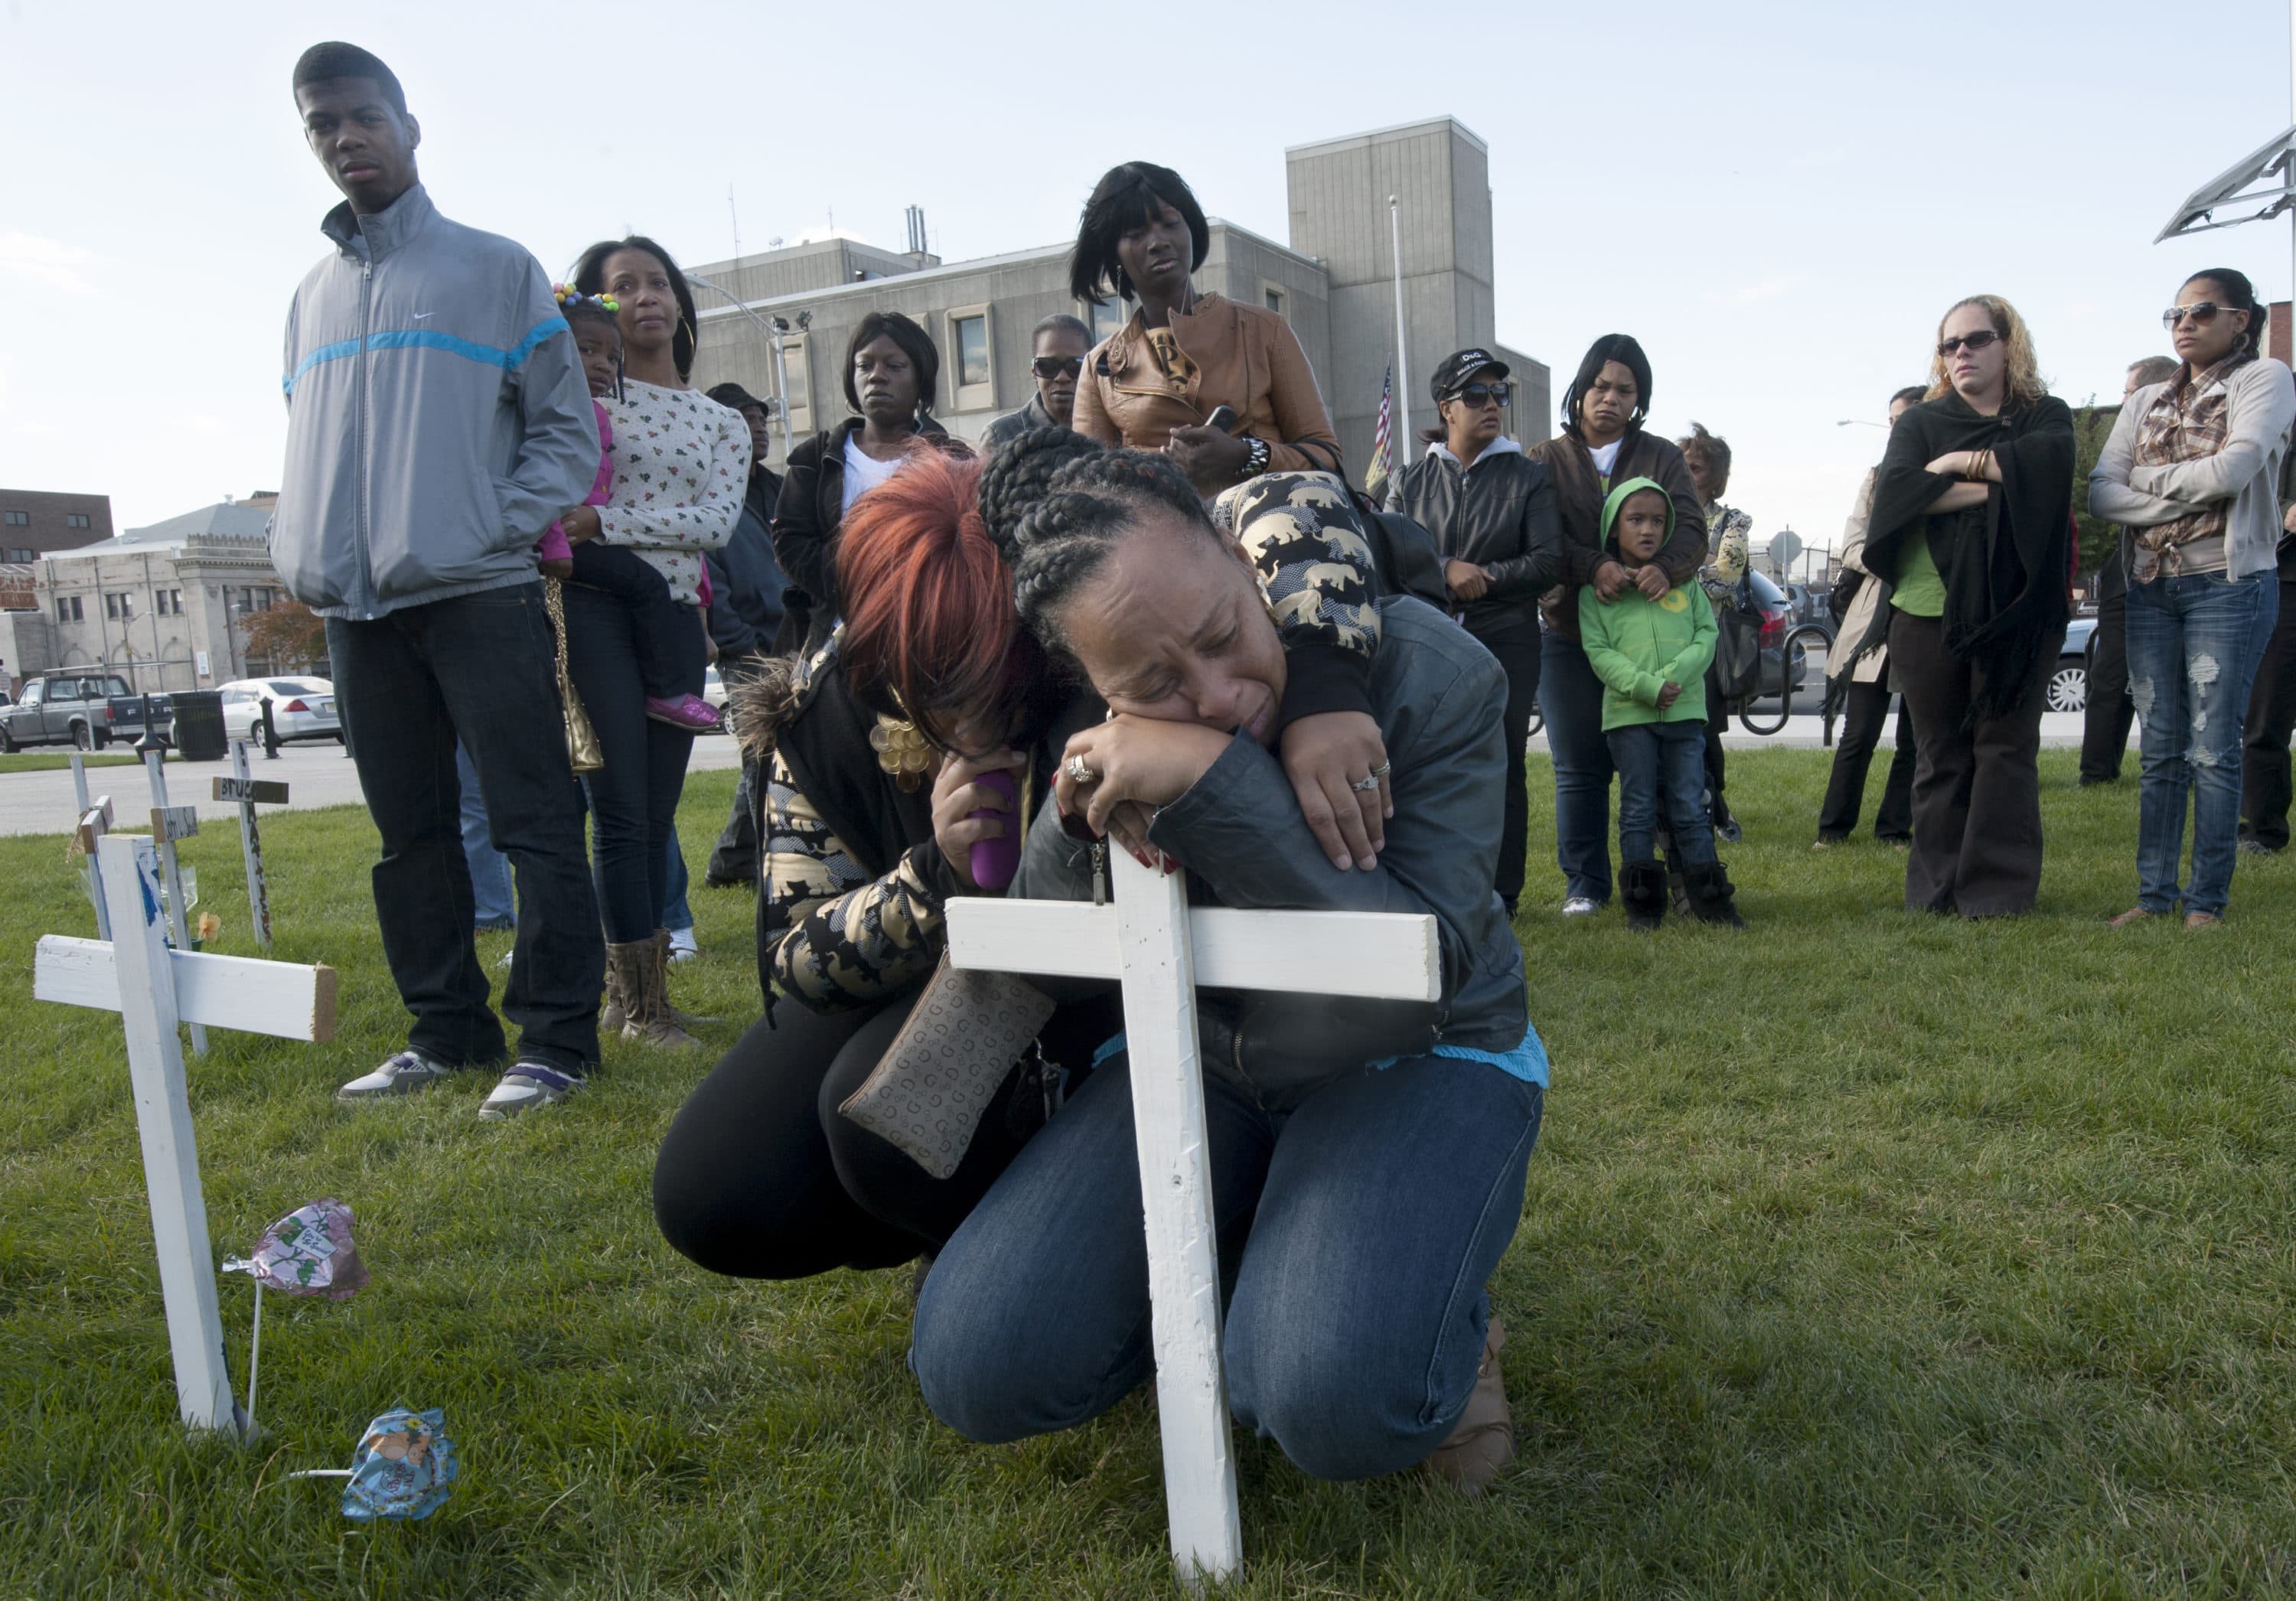 On Oct. 16, 2012, Lisa Anderson wept after a cross in memory of her son, Lateaf Anderson, was placed in a field commemorating that year's homicide victims in Camden in front of City Hall. (Photo by April Saul)